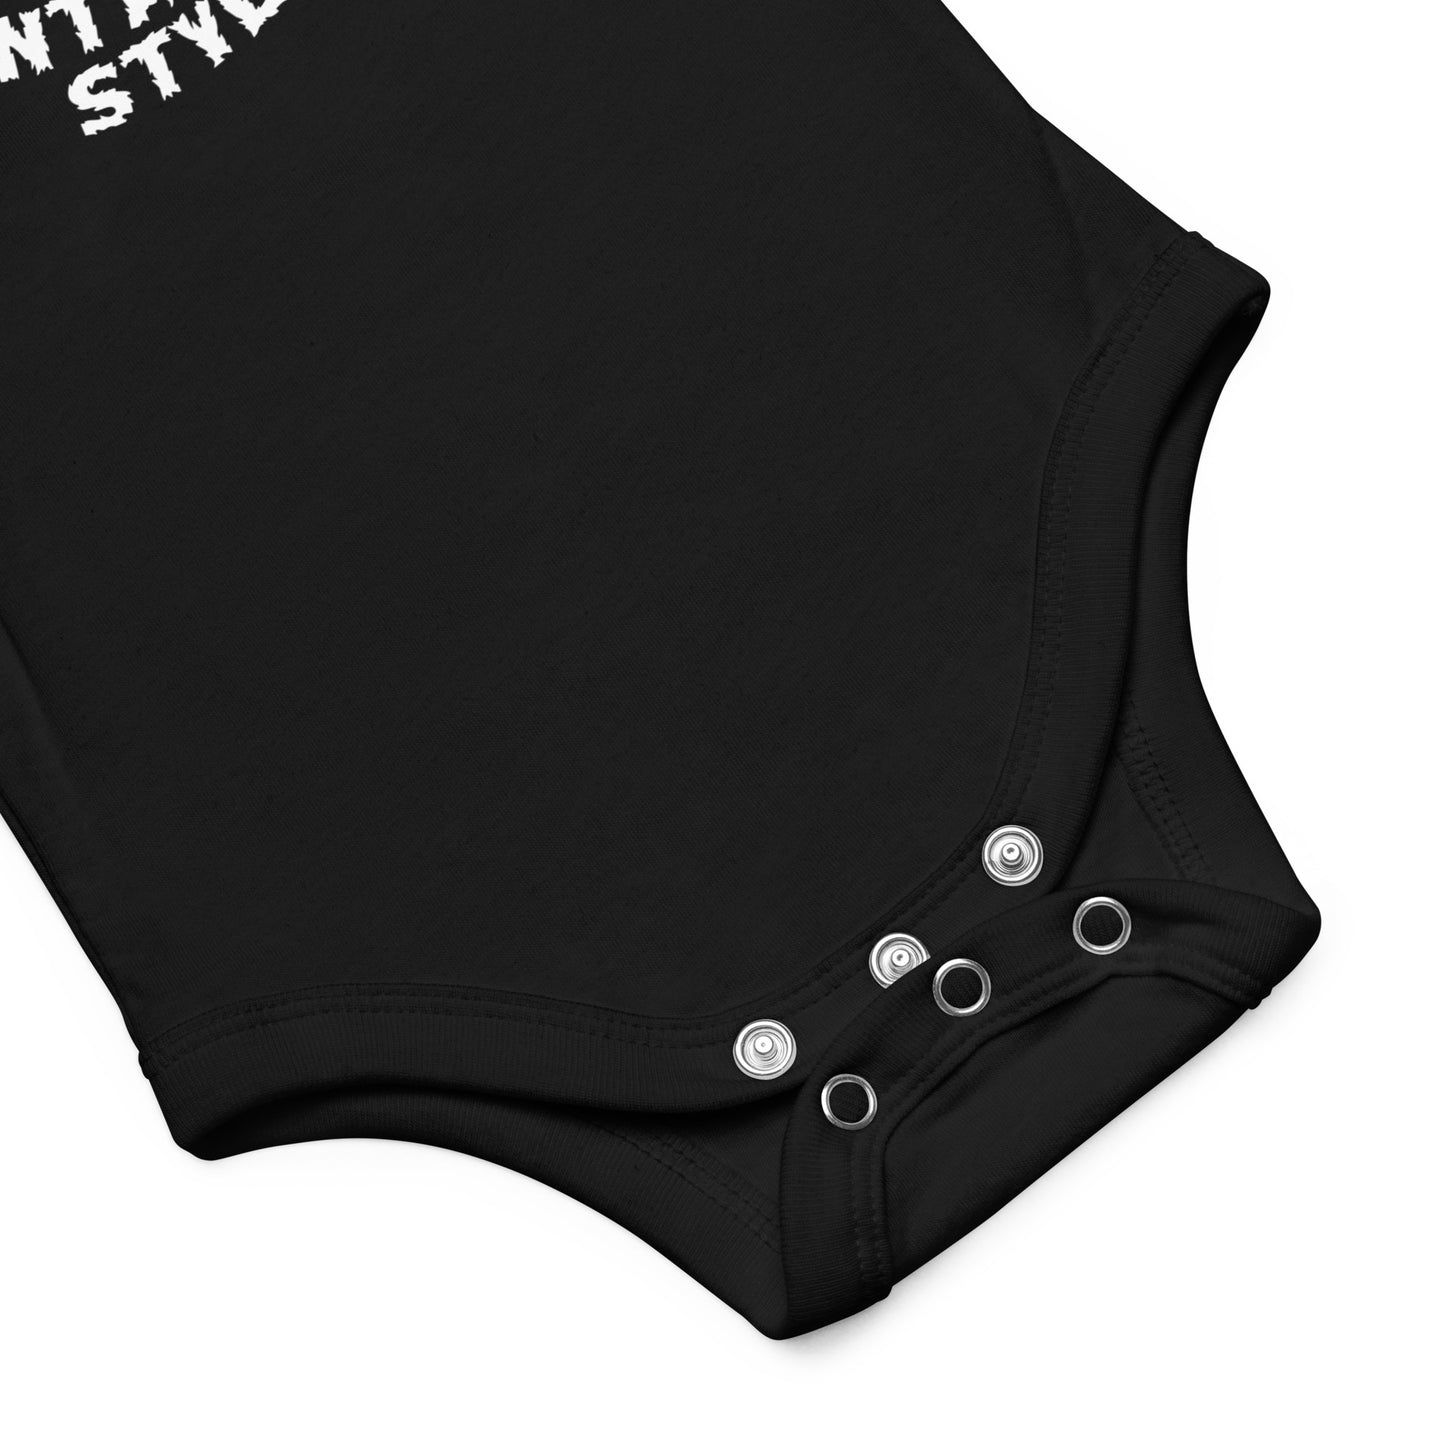 LEPPARD BABY ONSIE'S FOR YOUR LITTLE CUBS in Black with White Font